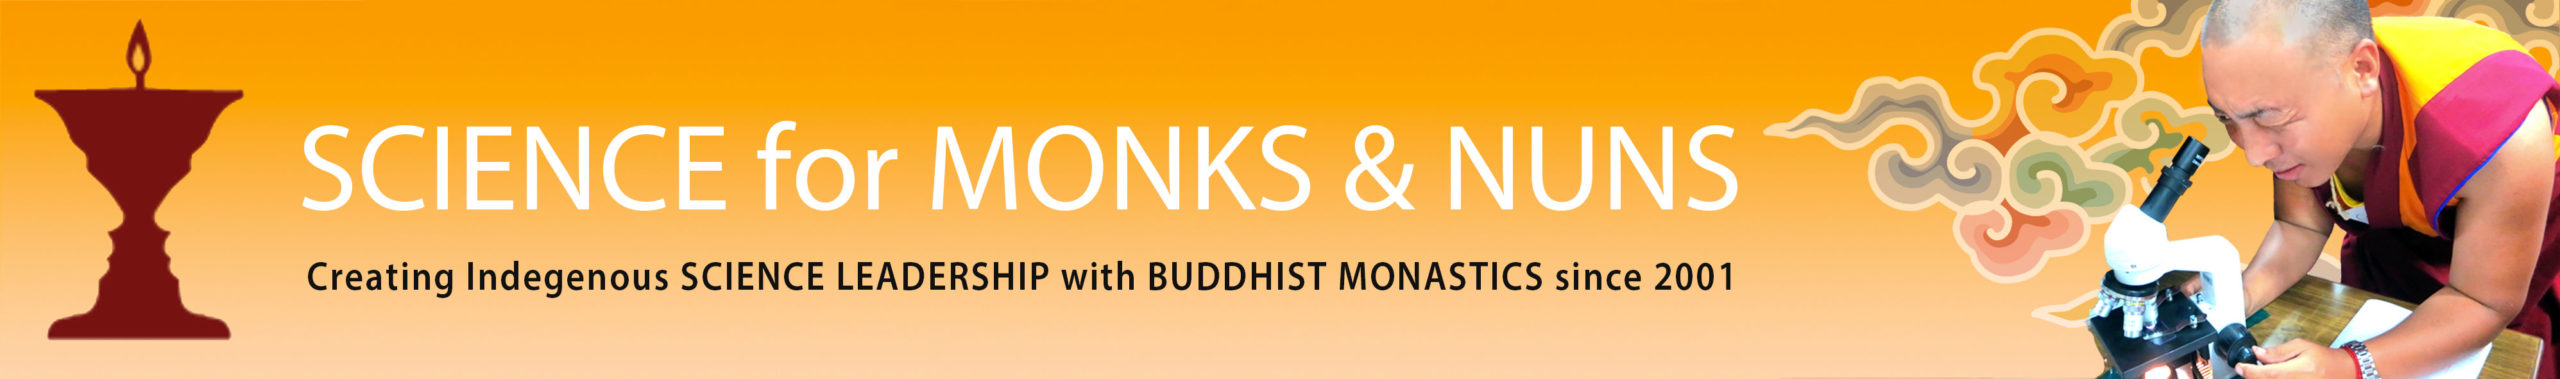 Science for Monks & Nuns